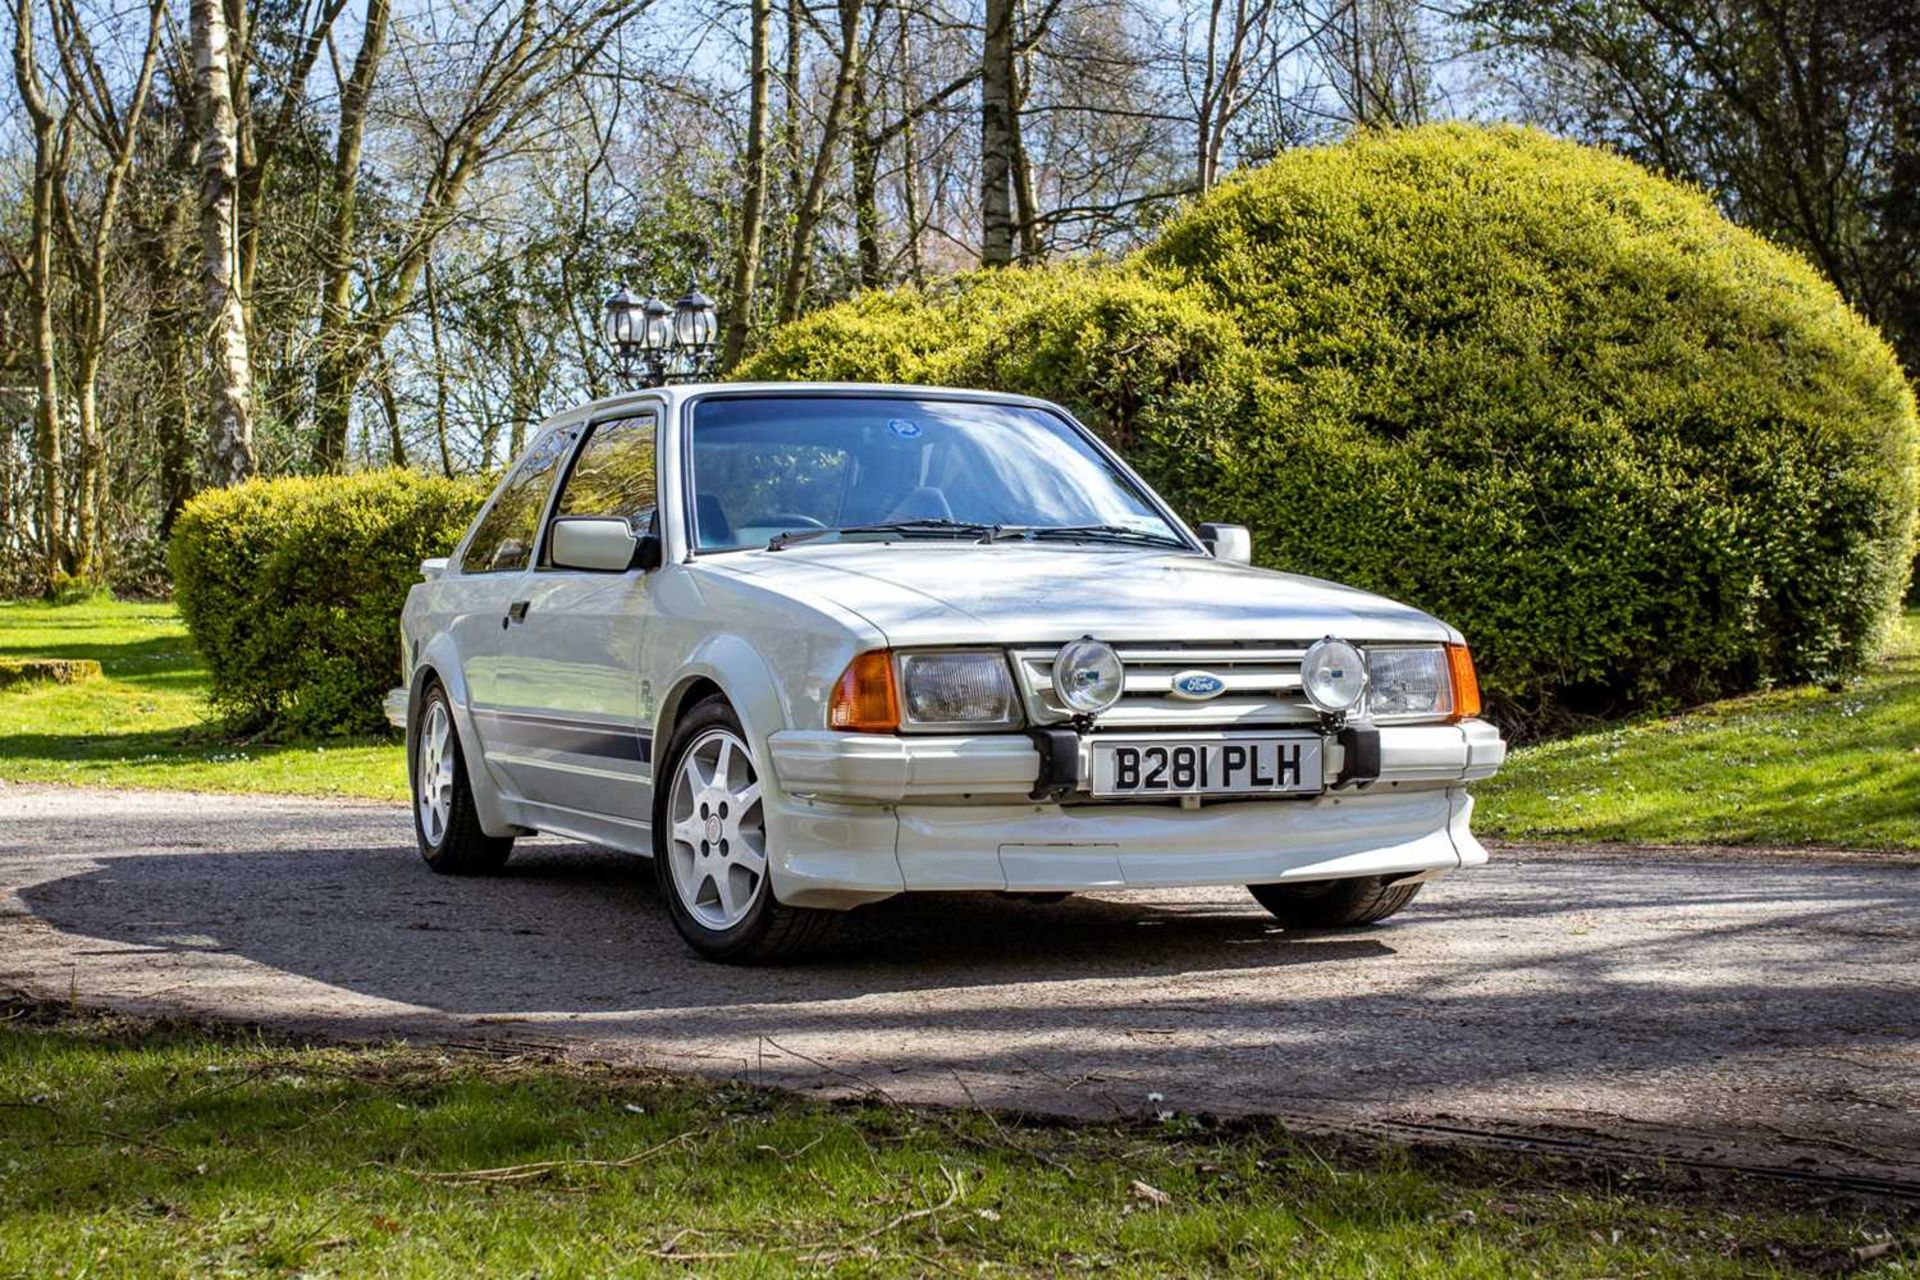 1985 Ford Escort RS Turbo S1 Subject to a full restoration  - Image 2 of 76